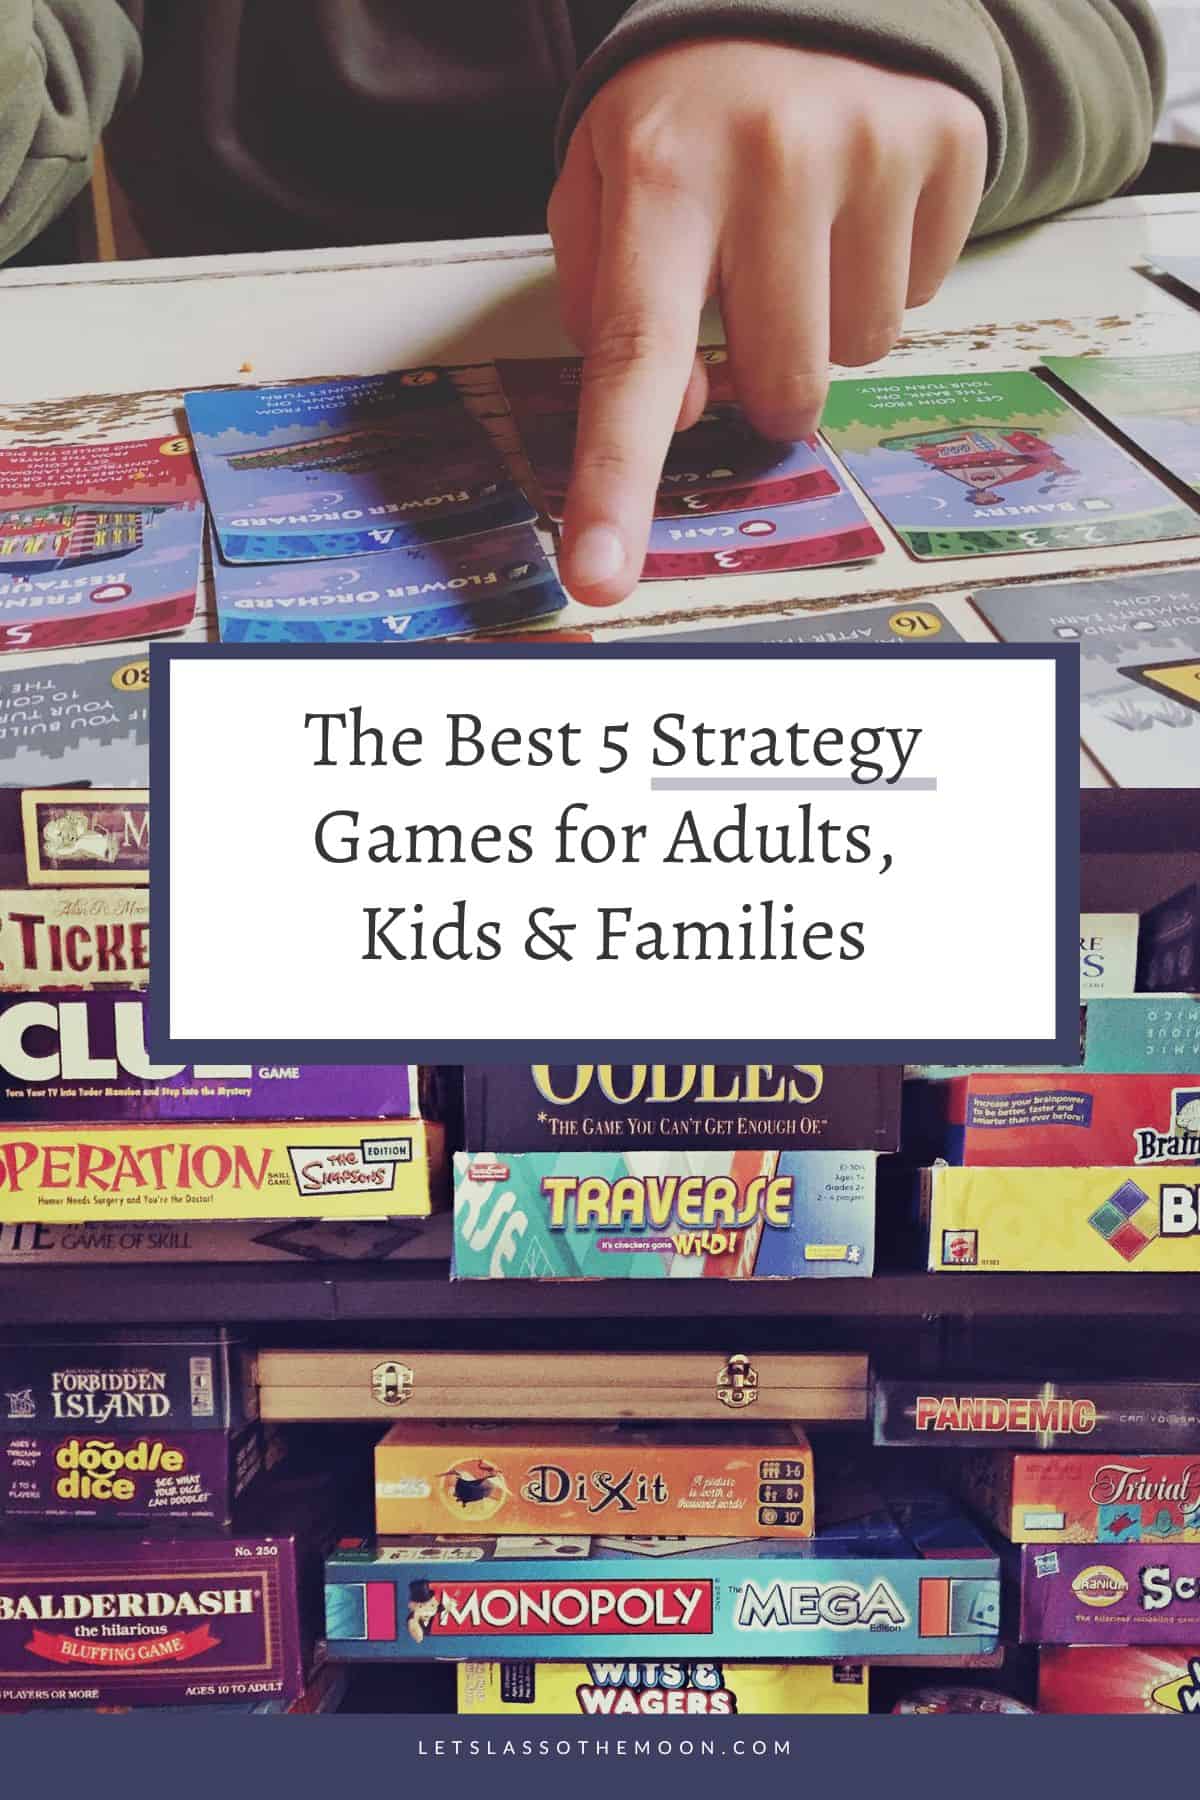 Collage of strategy game photos with the post headline for saving on Pinterest.